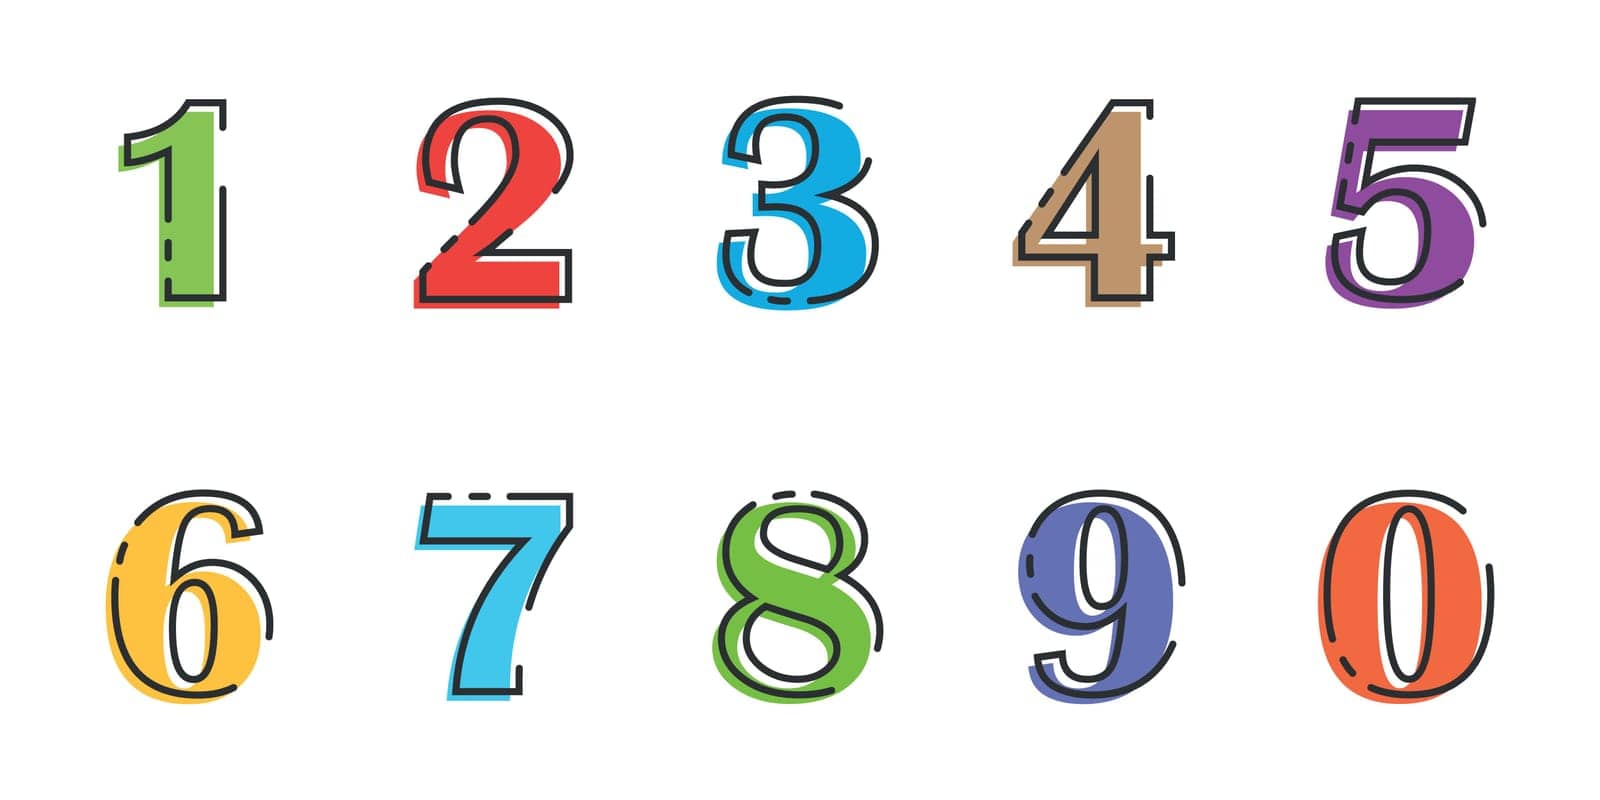 Numbers font icon in flat style. Typography vector illustration on isolated background. Numeral typographic sign business concept.